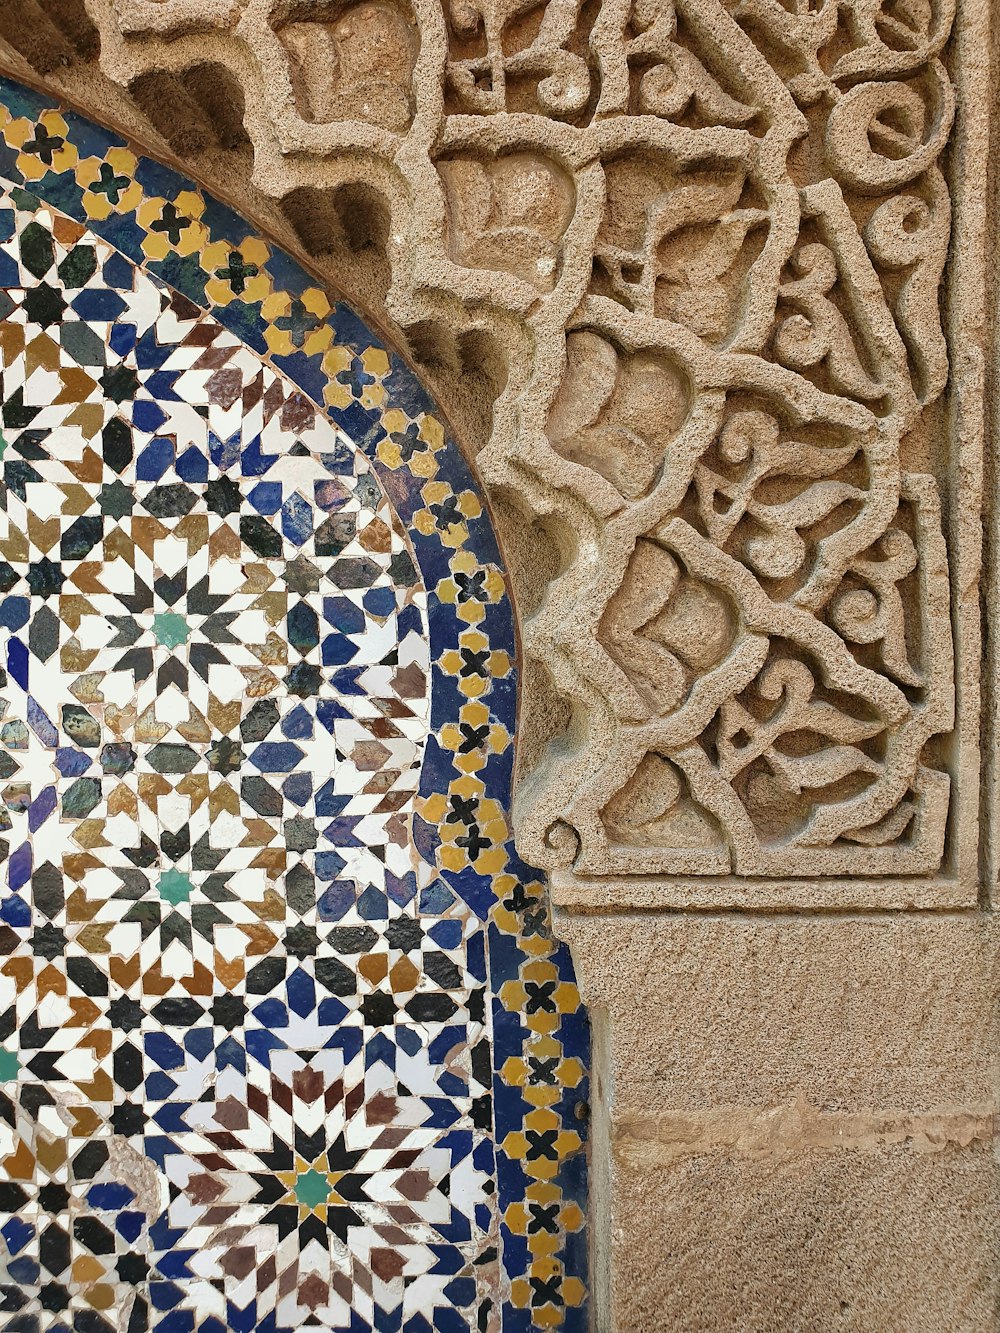 a close up of a decorative tile on a wall